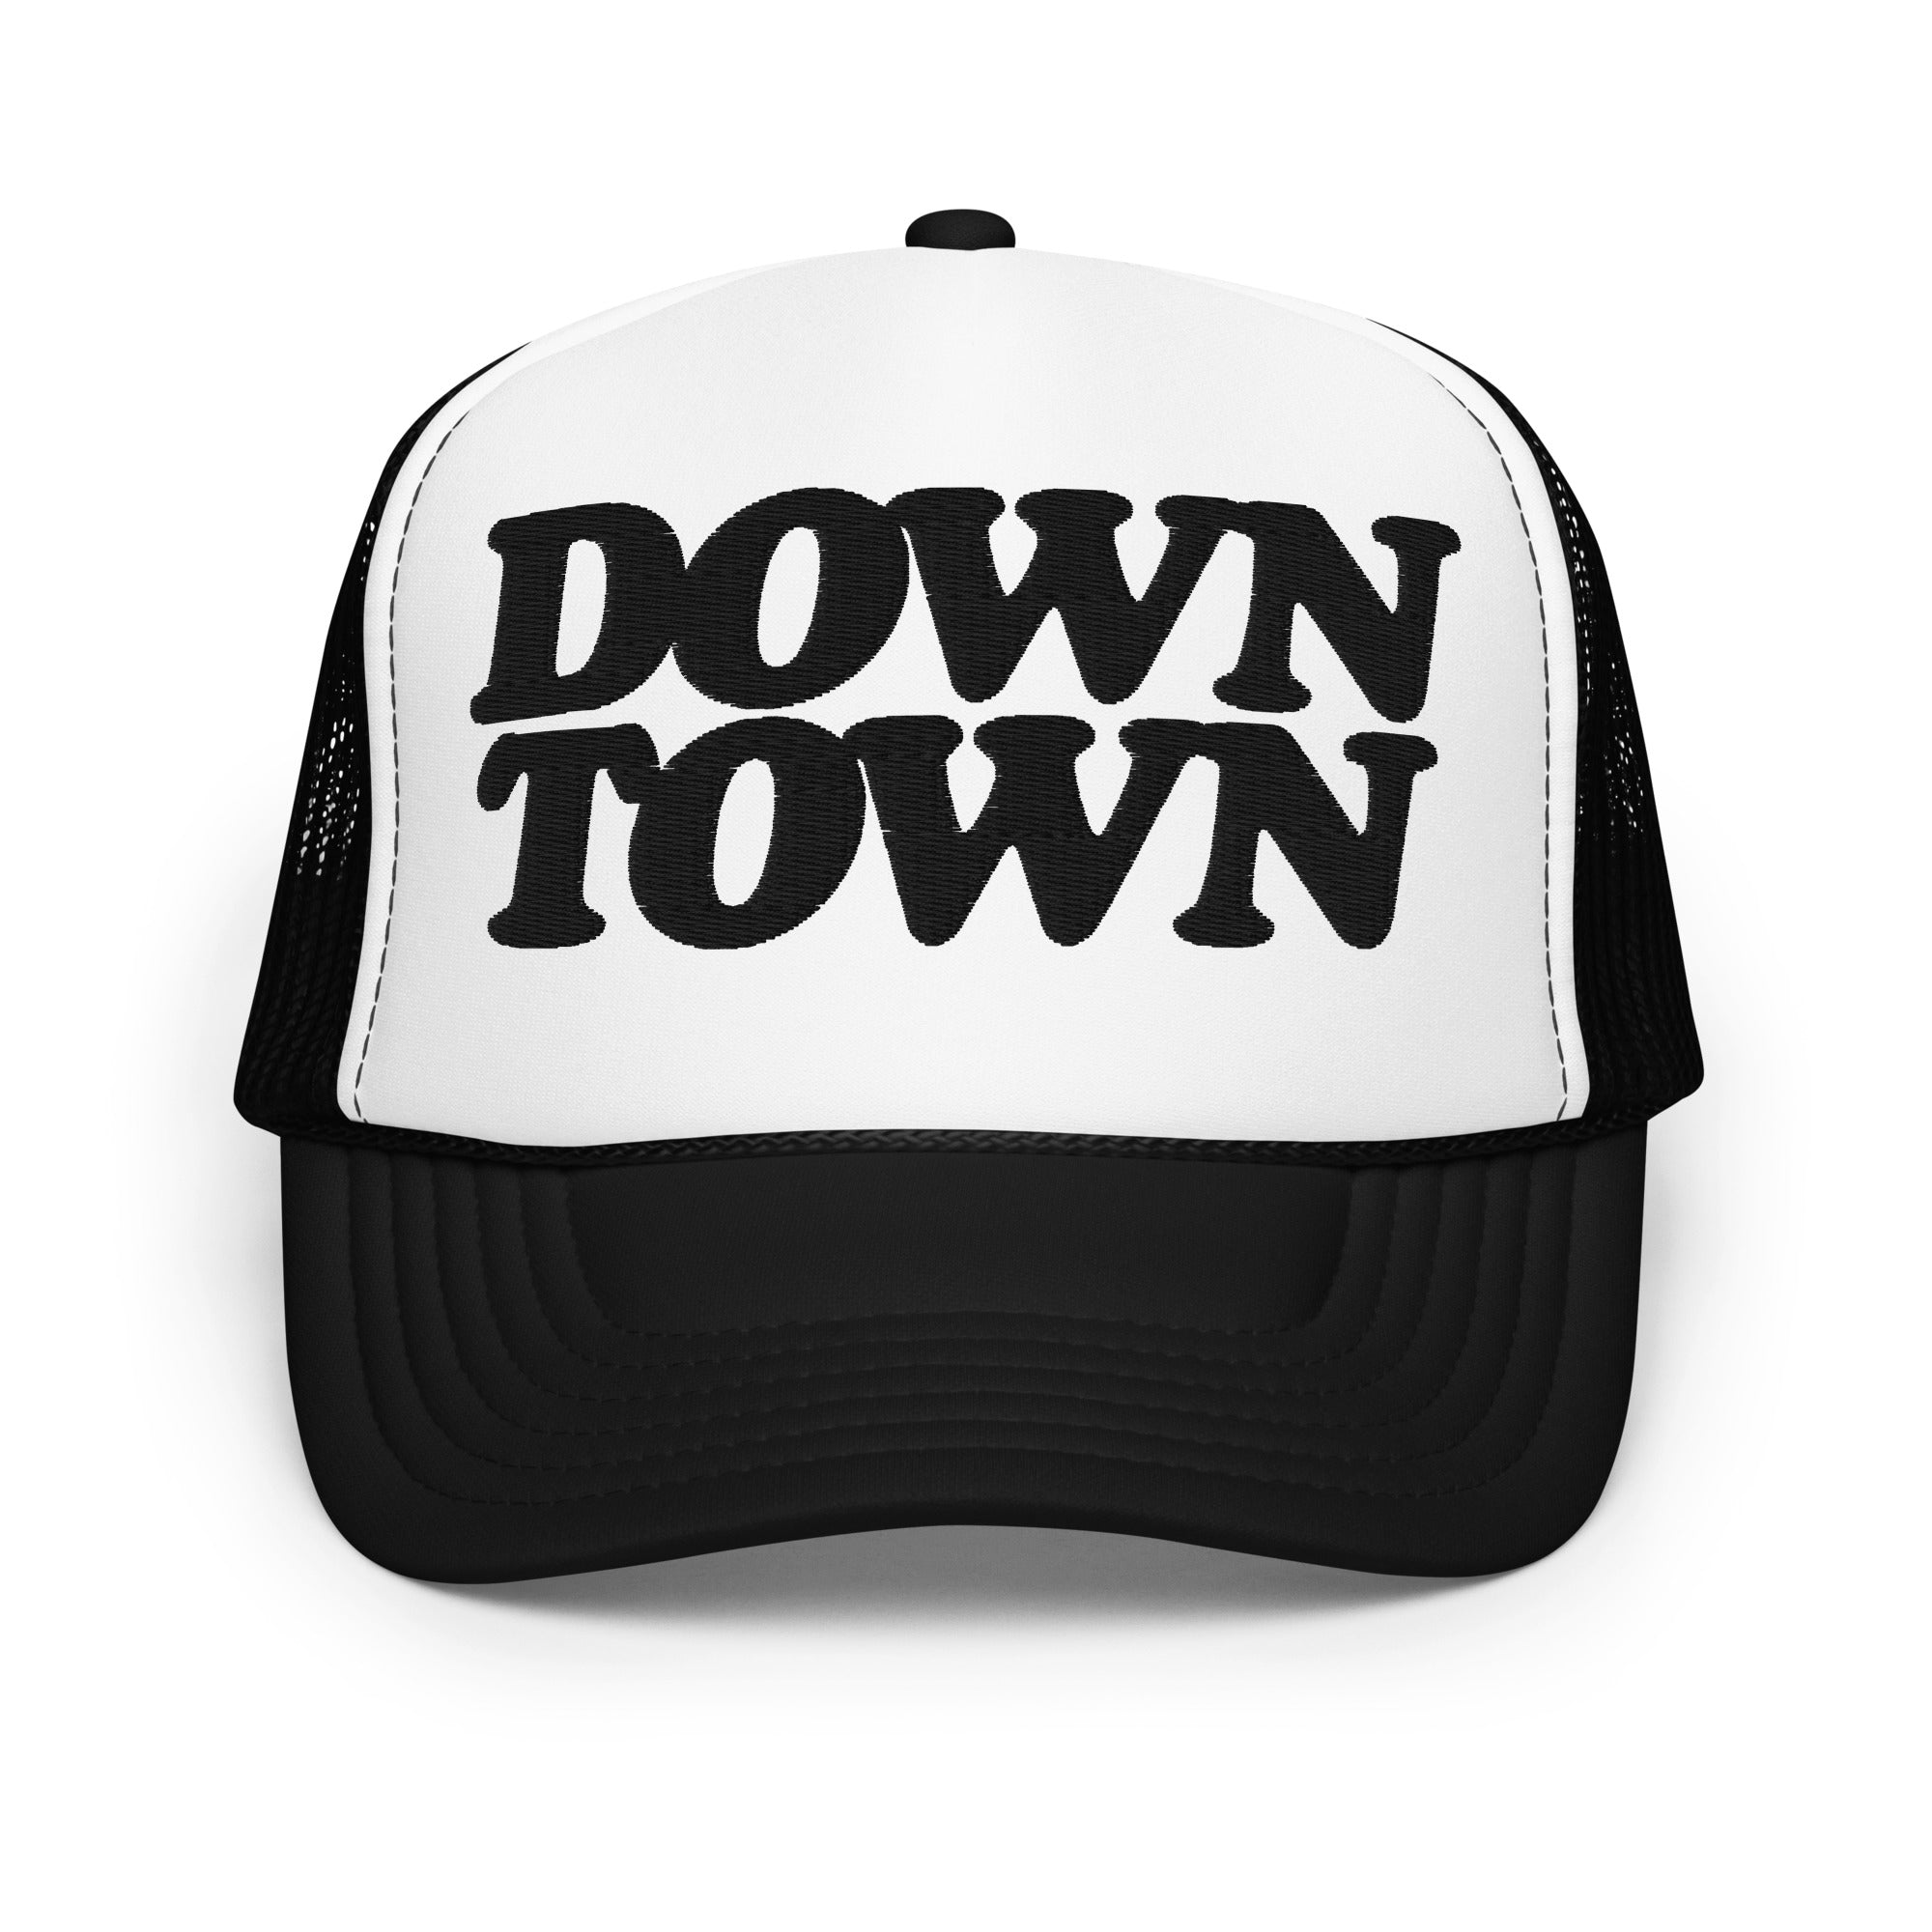 Downtown Foam Trucker Hat - Embroidered - Black / White  Default Title  